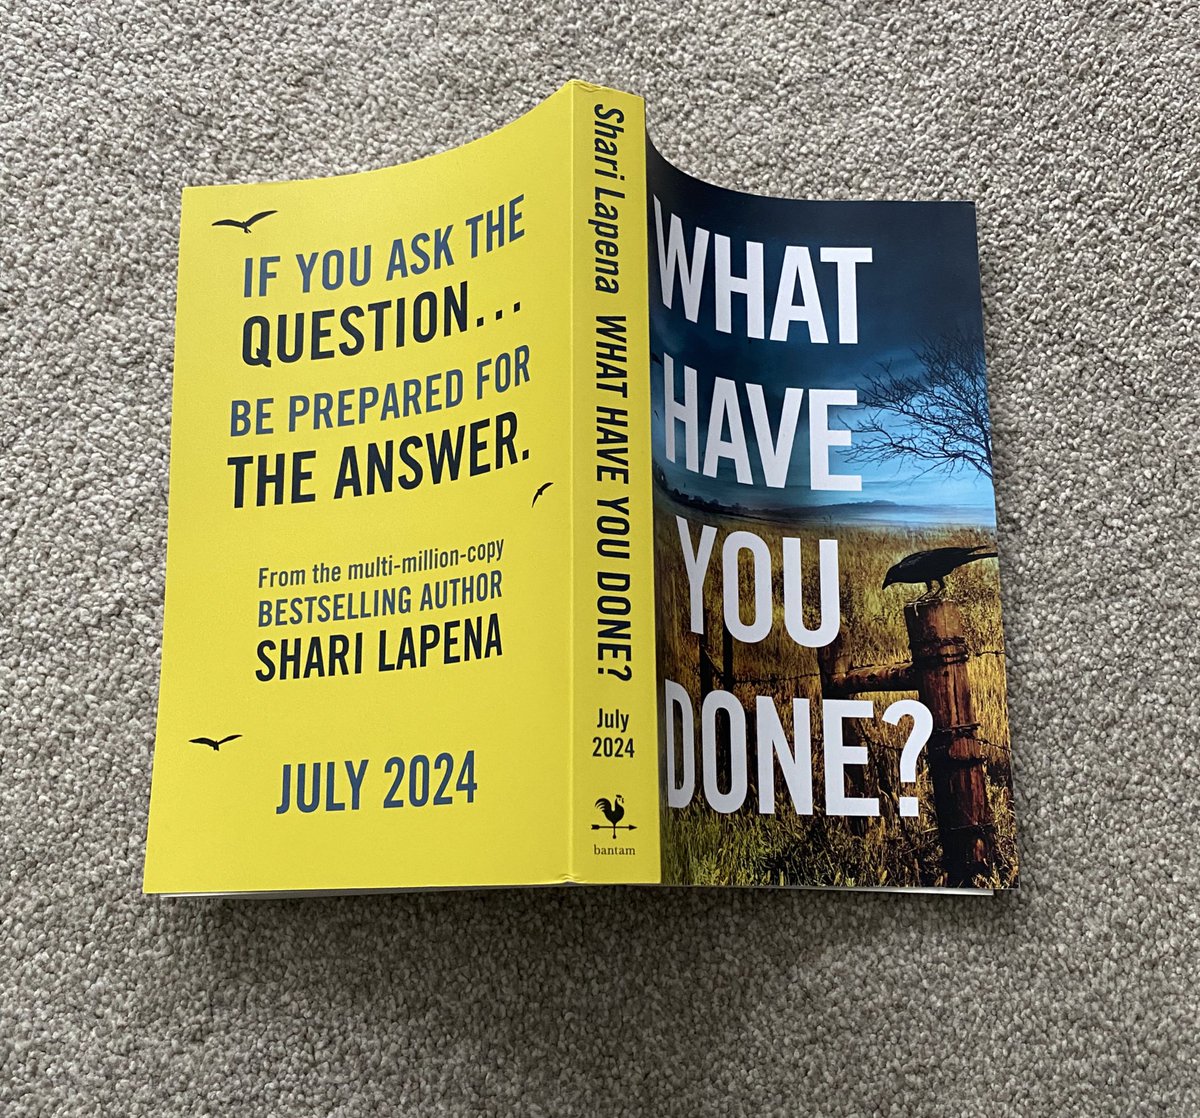 Many thanks to @ThomasssHill @TransworldBooks for my copy of #WhatHaveYouDone by @sharilapena Out 18th July. Sounds fab! #booktwitter #booktwt #bookX